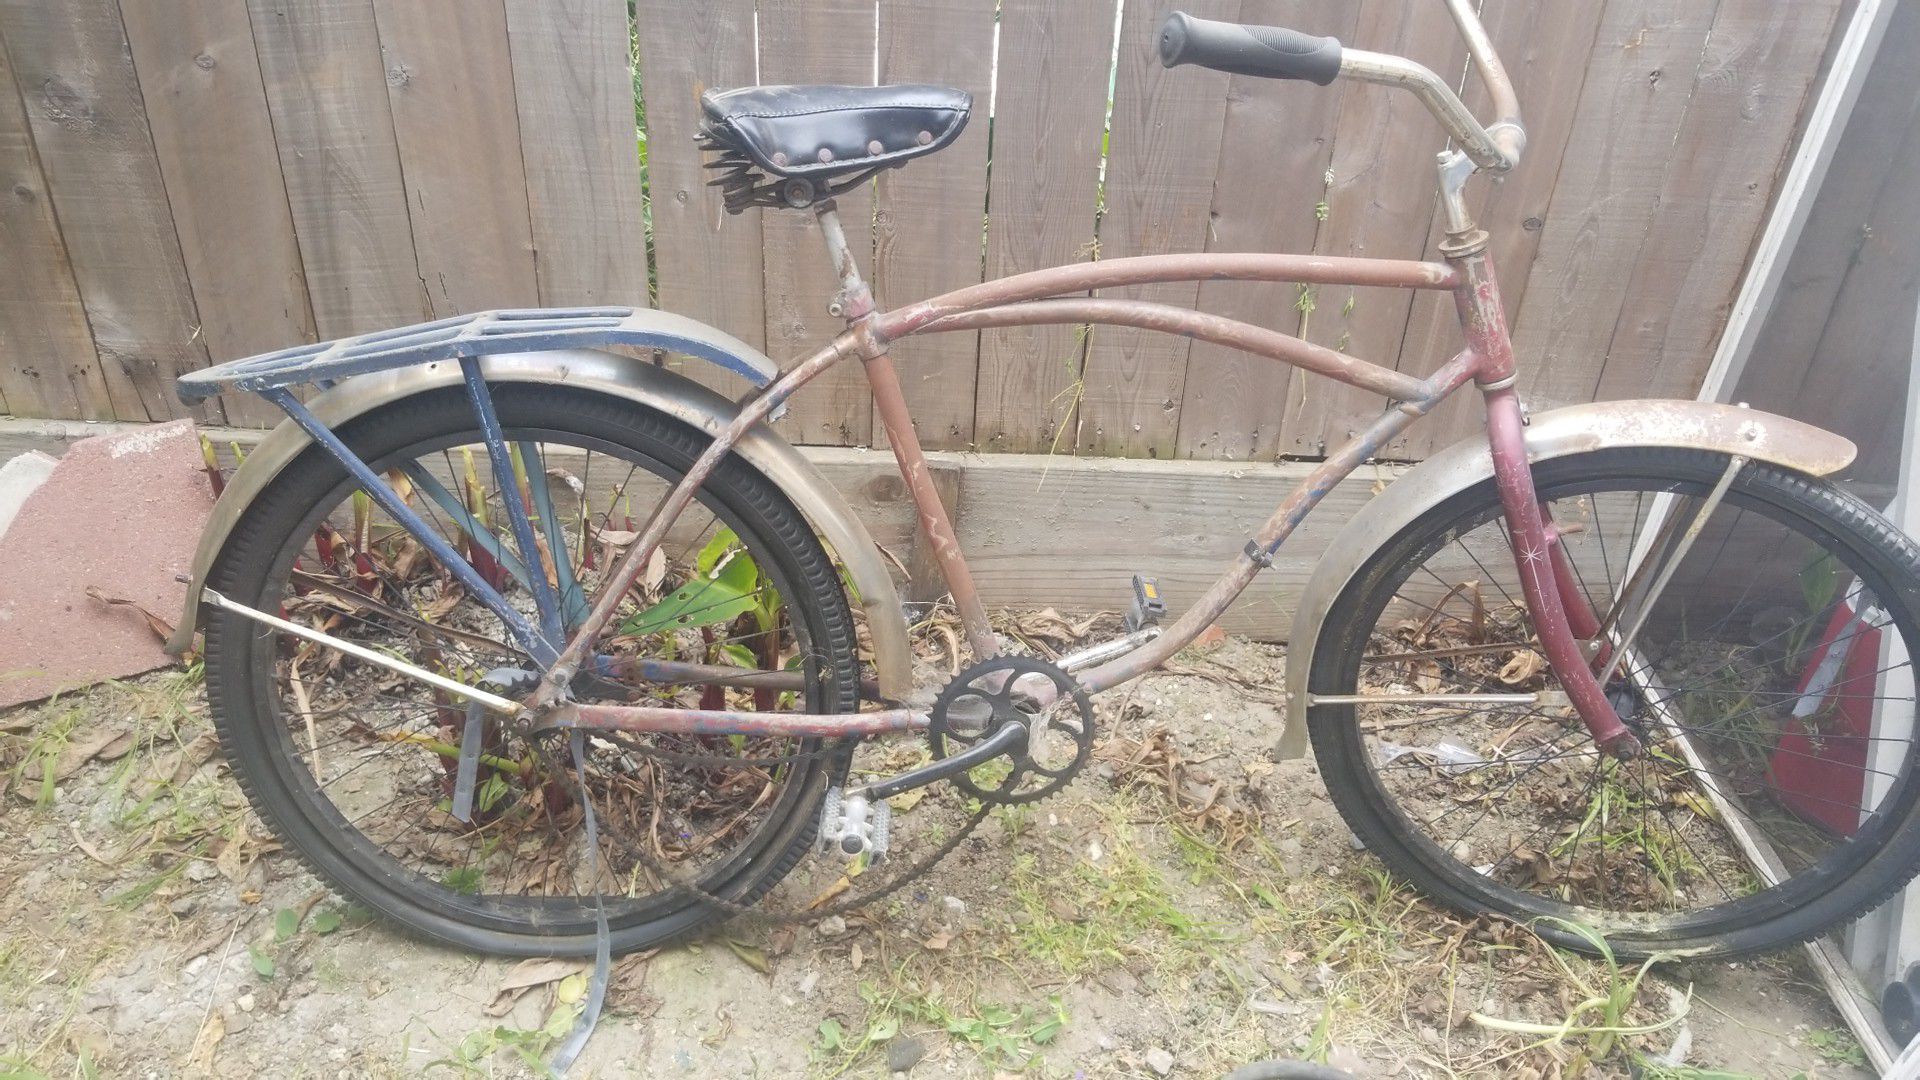 1940,s or 50's Old shelby cruiser bike